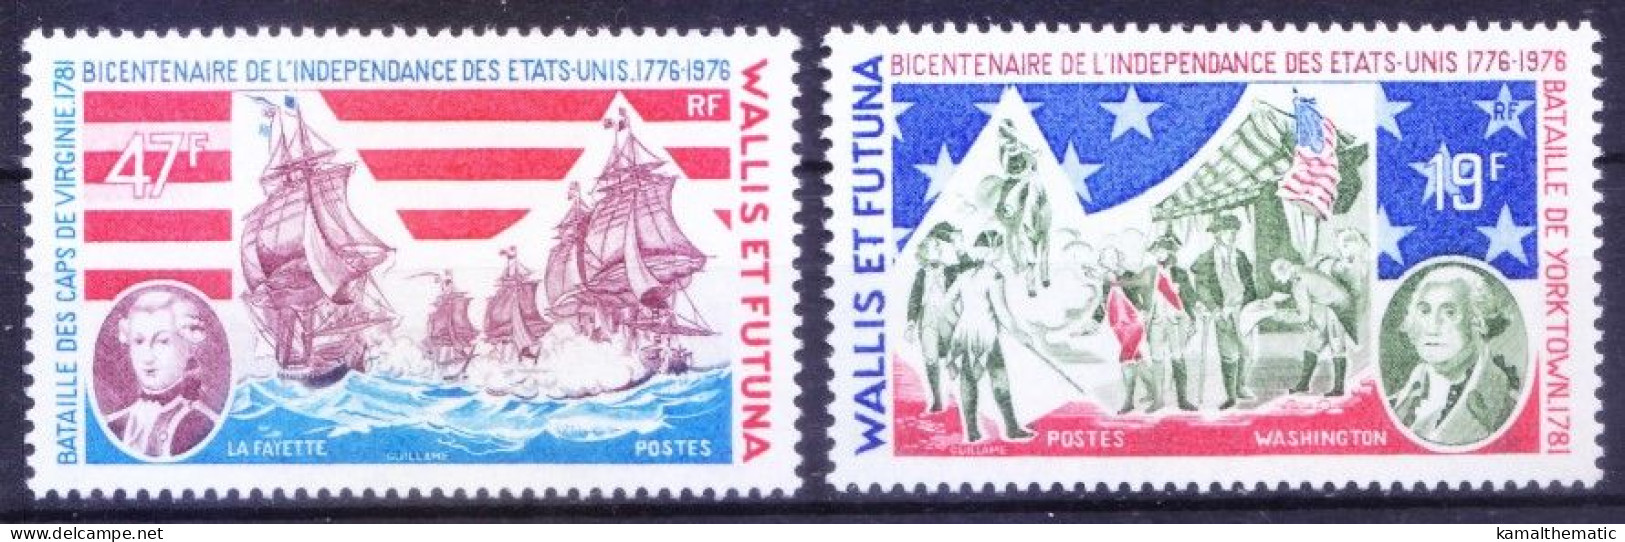 Wallis And Futuna 196 MNH 2v, Bicentenary Of Independence Of United States - Indépendance USA